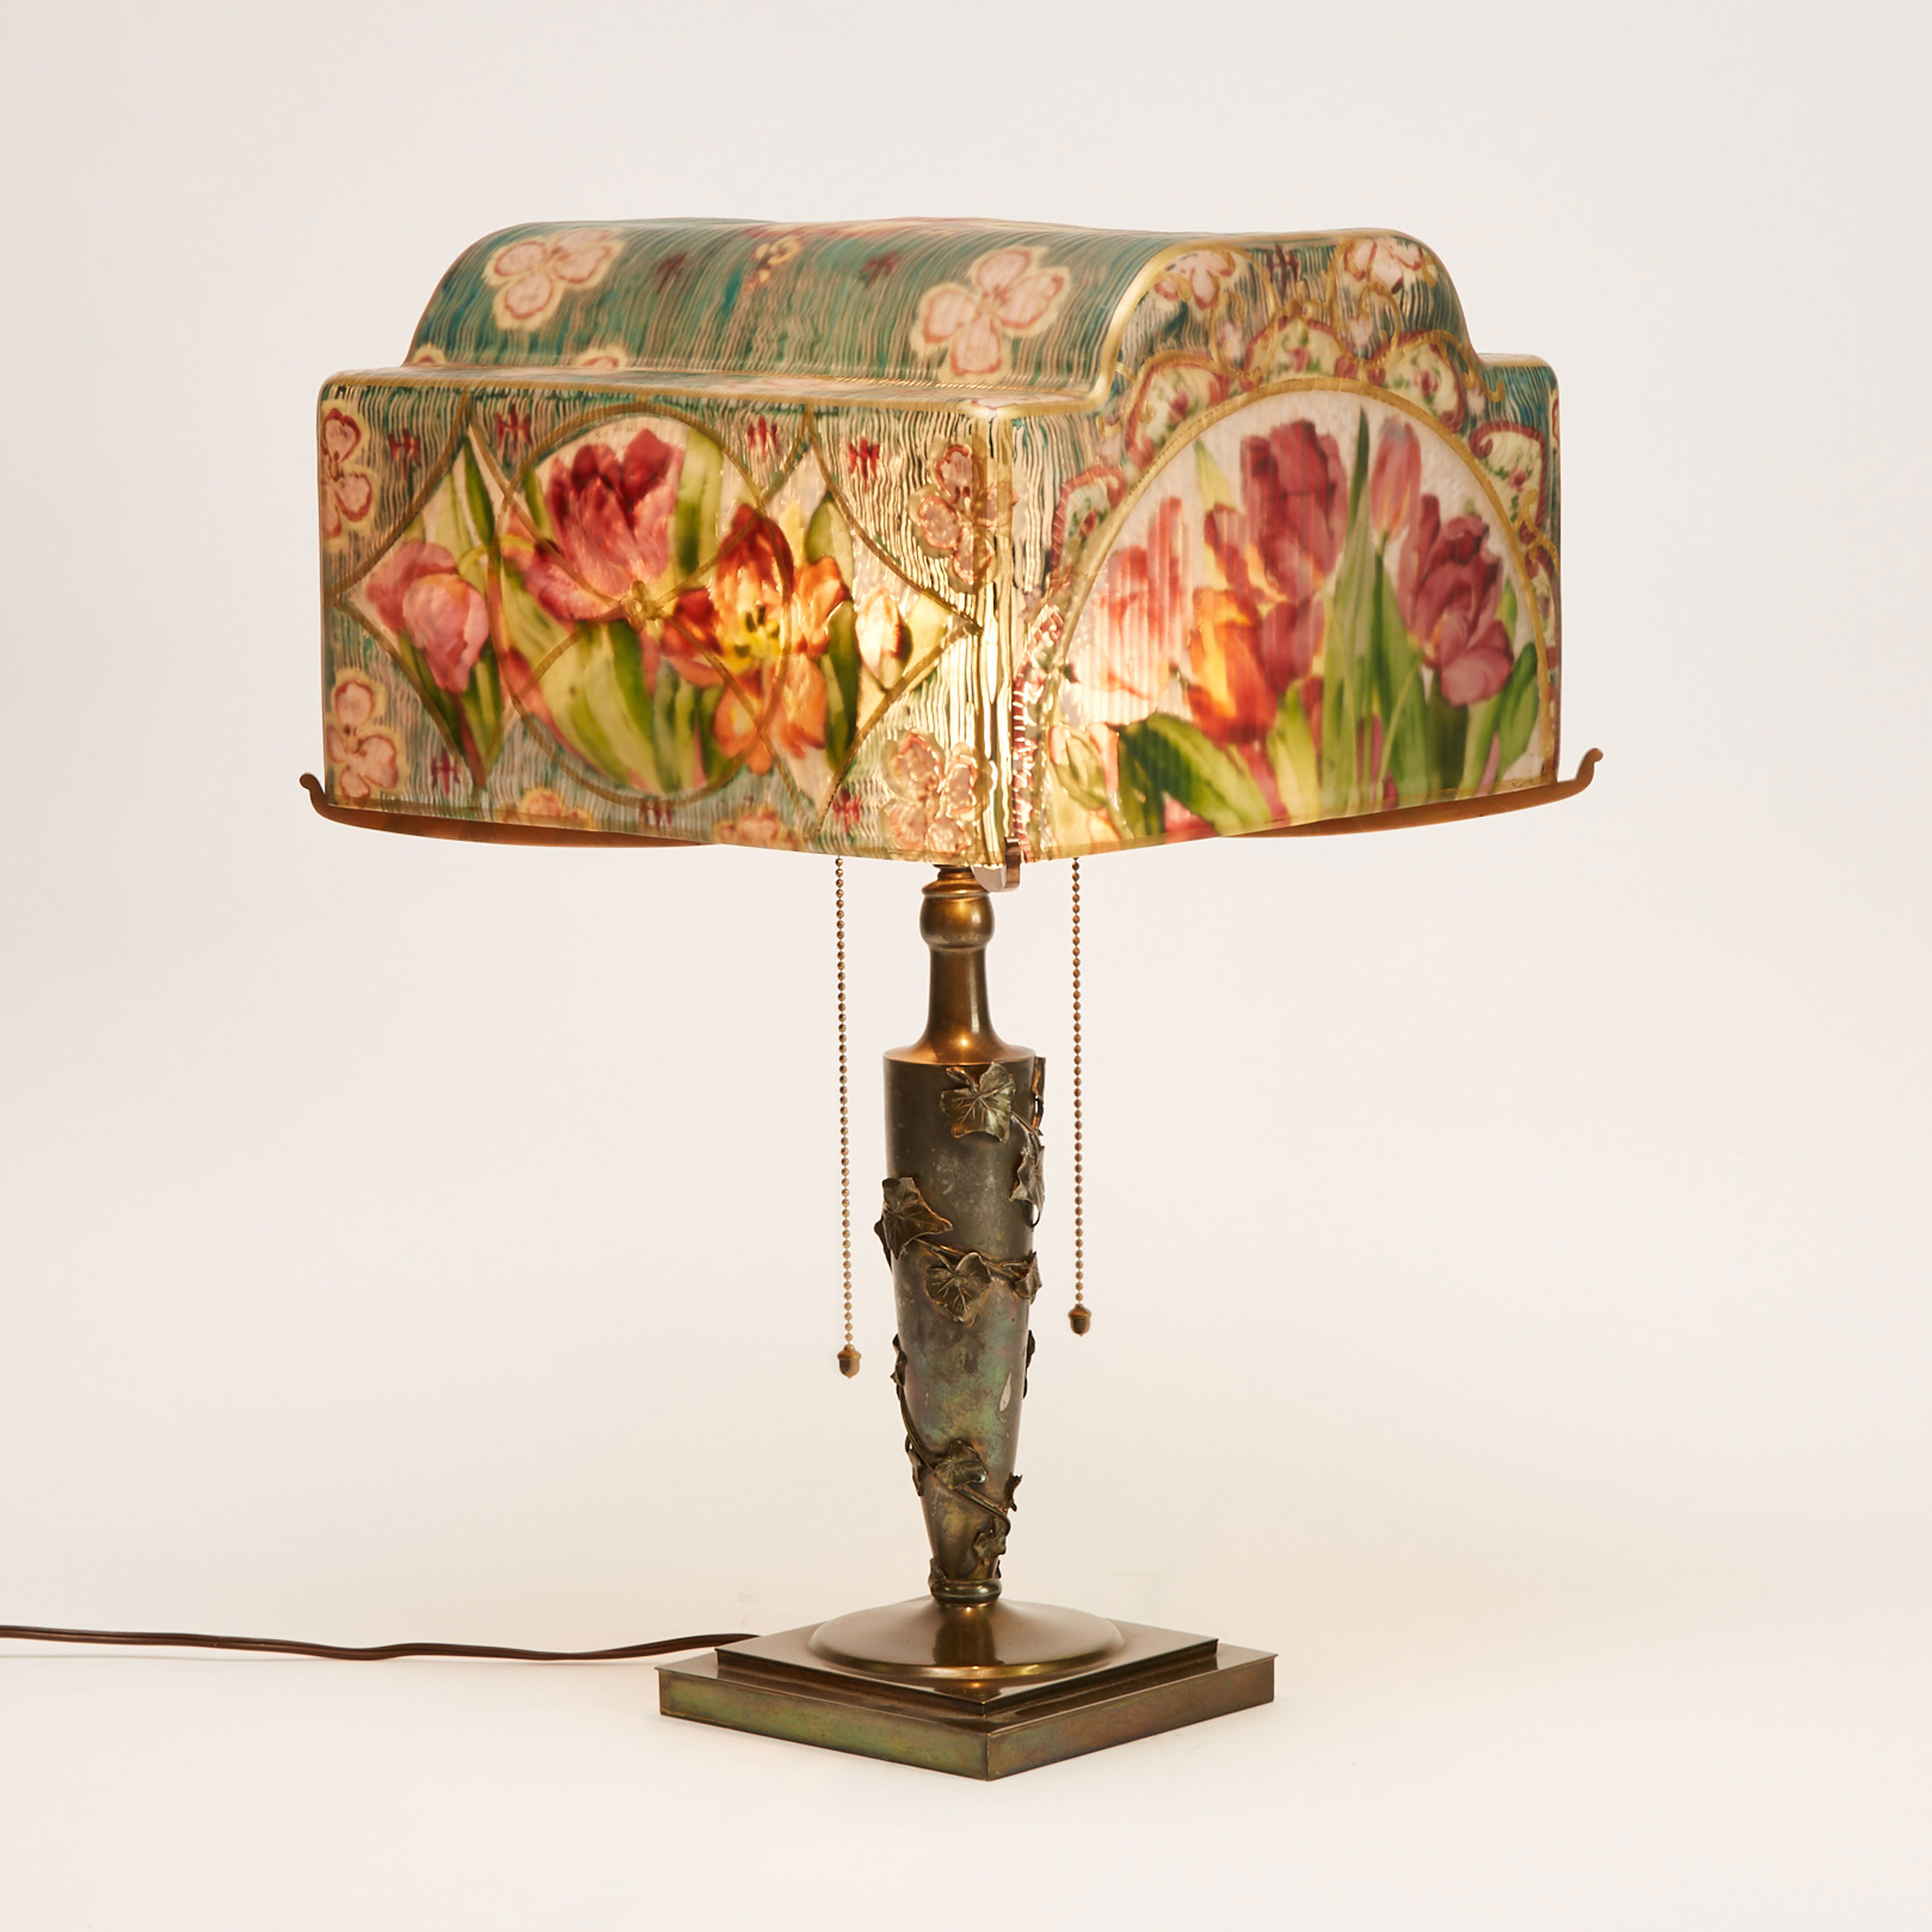 Pairpoint Puffy Tulip Pattern ‘Roma’ Shade Table Lamp, early 20th century